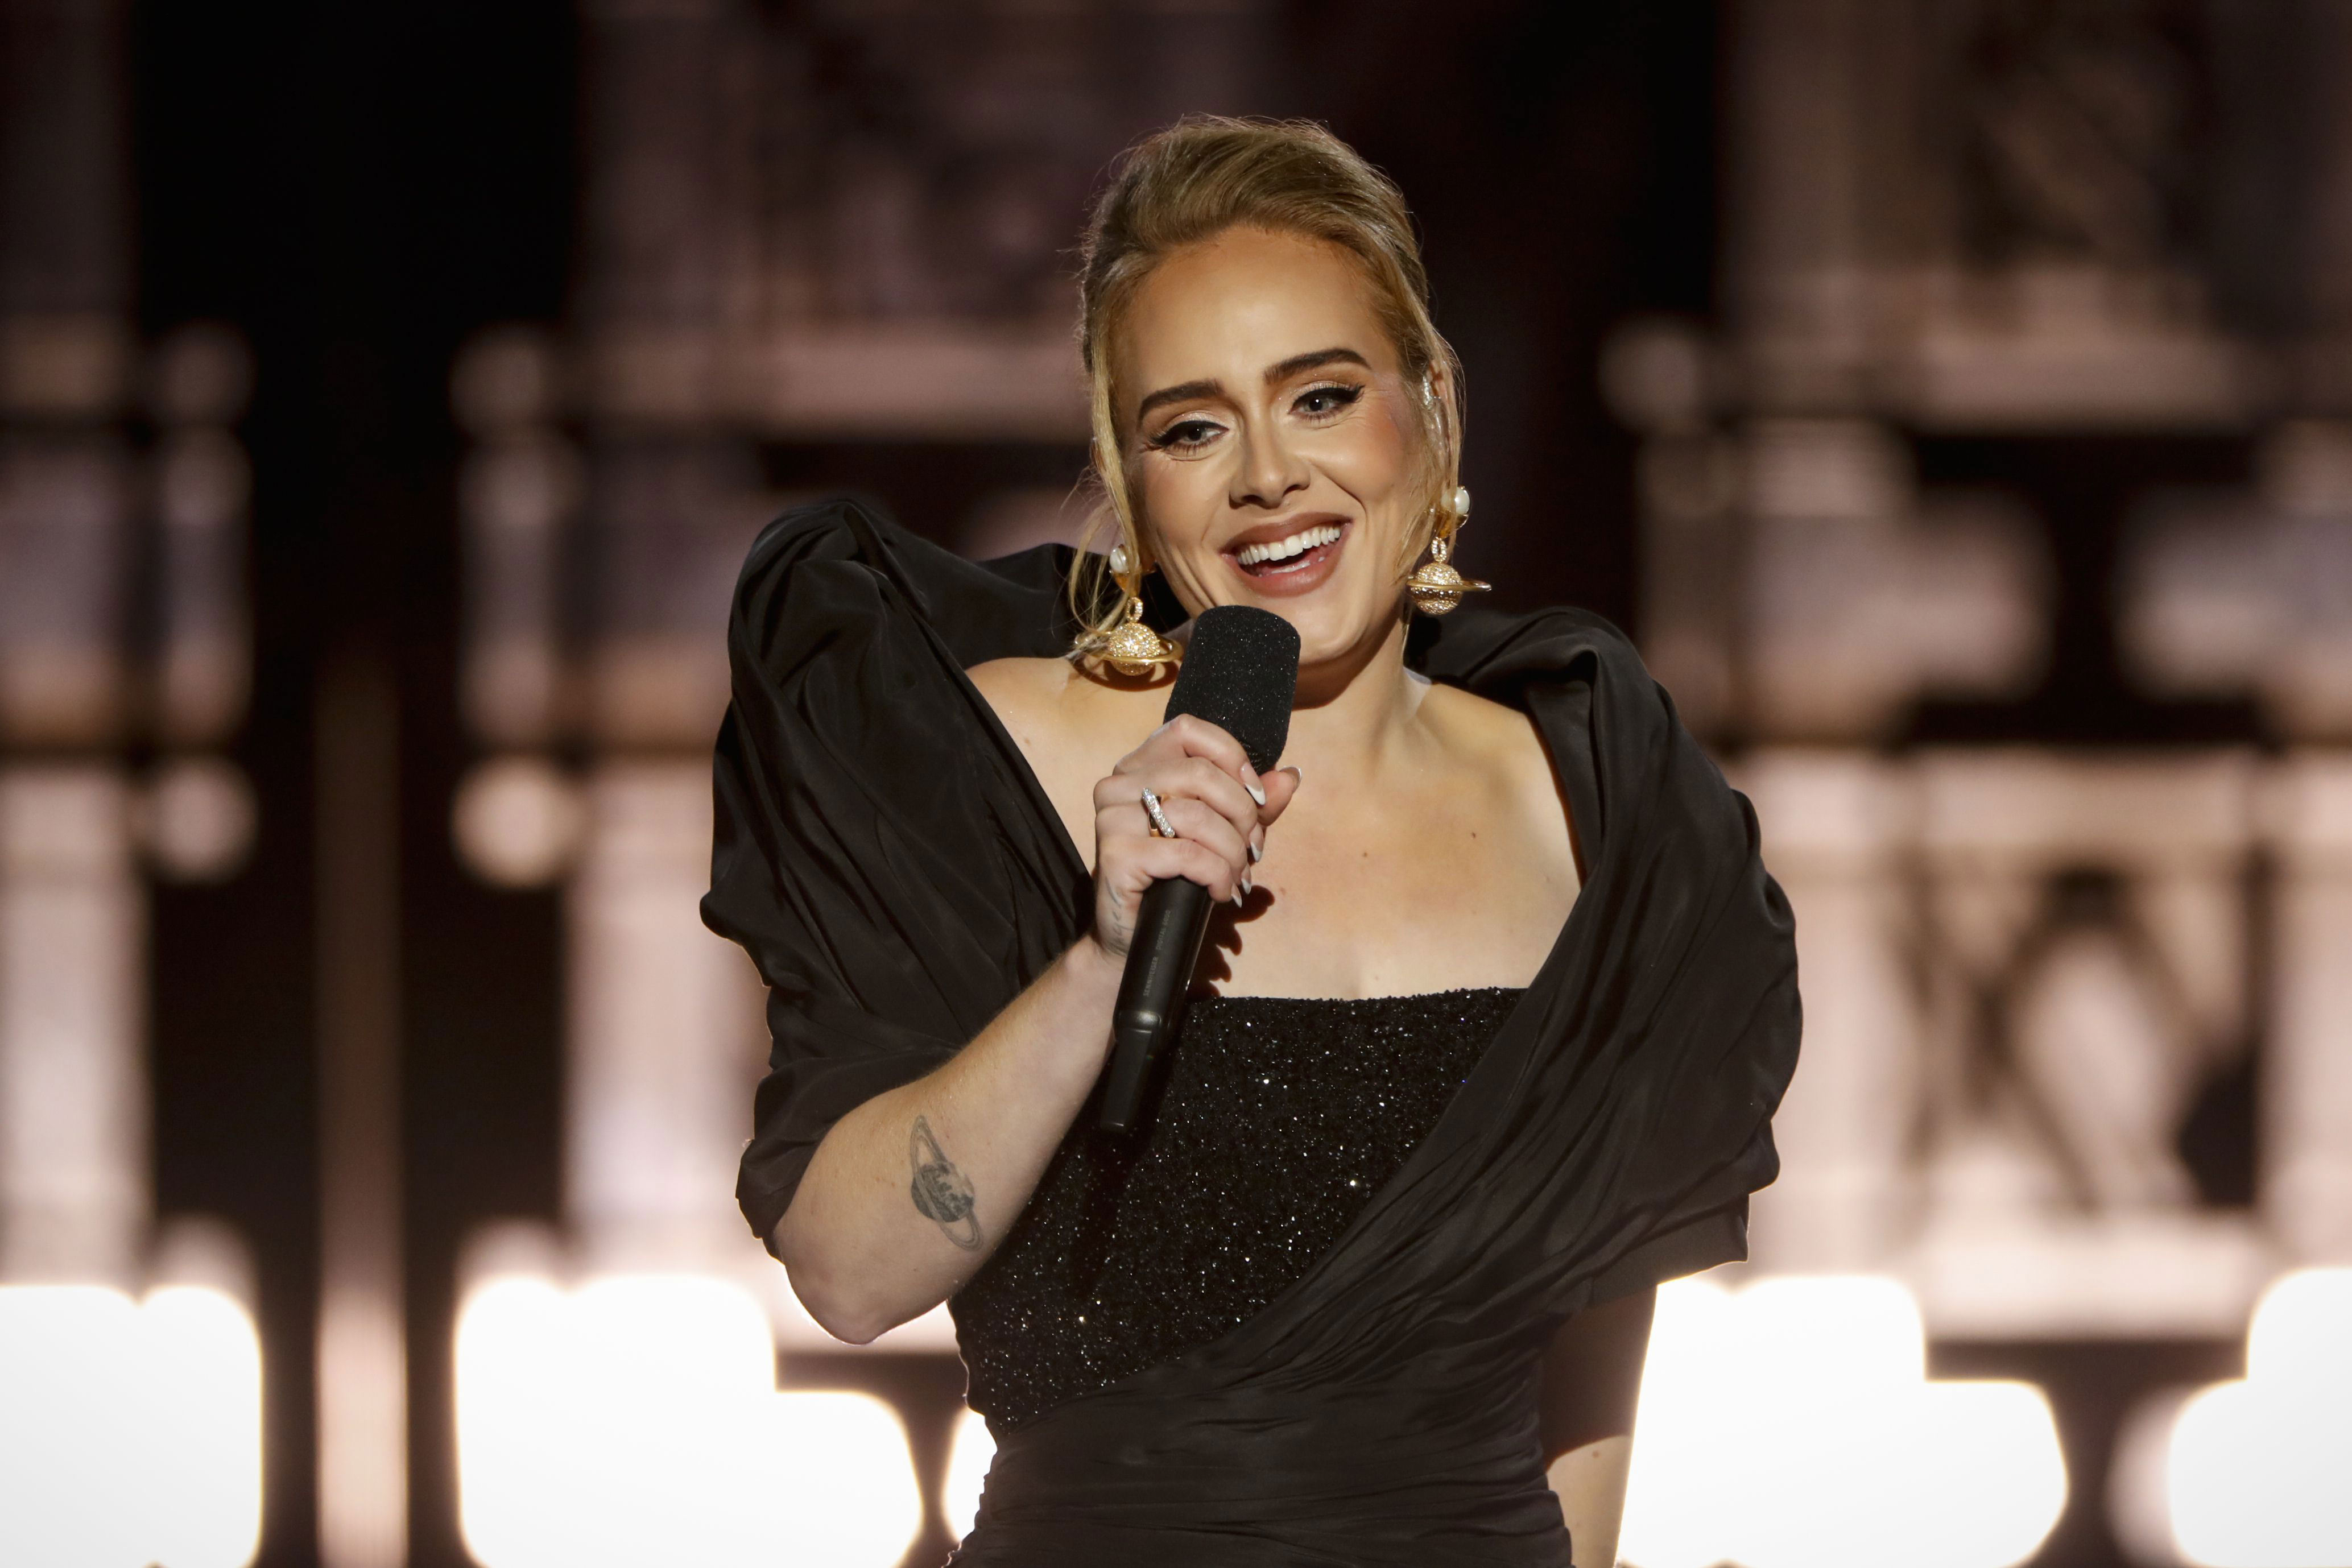 8 Of Adele's Best Songs You Can't Help But Sing Along To